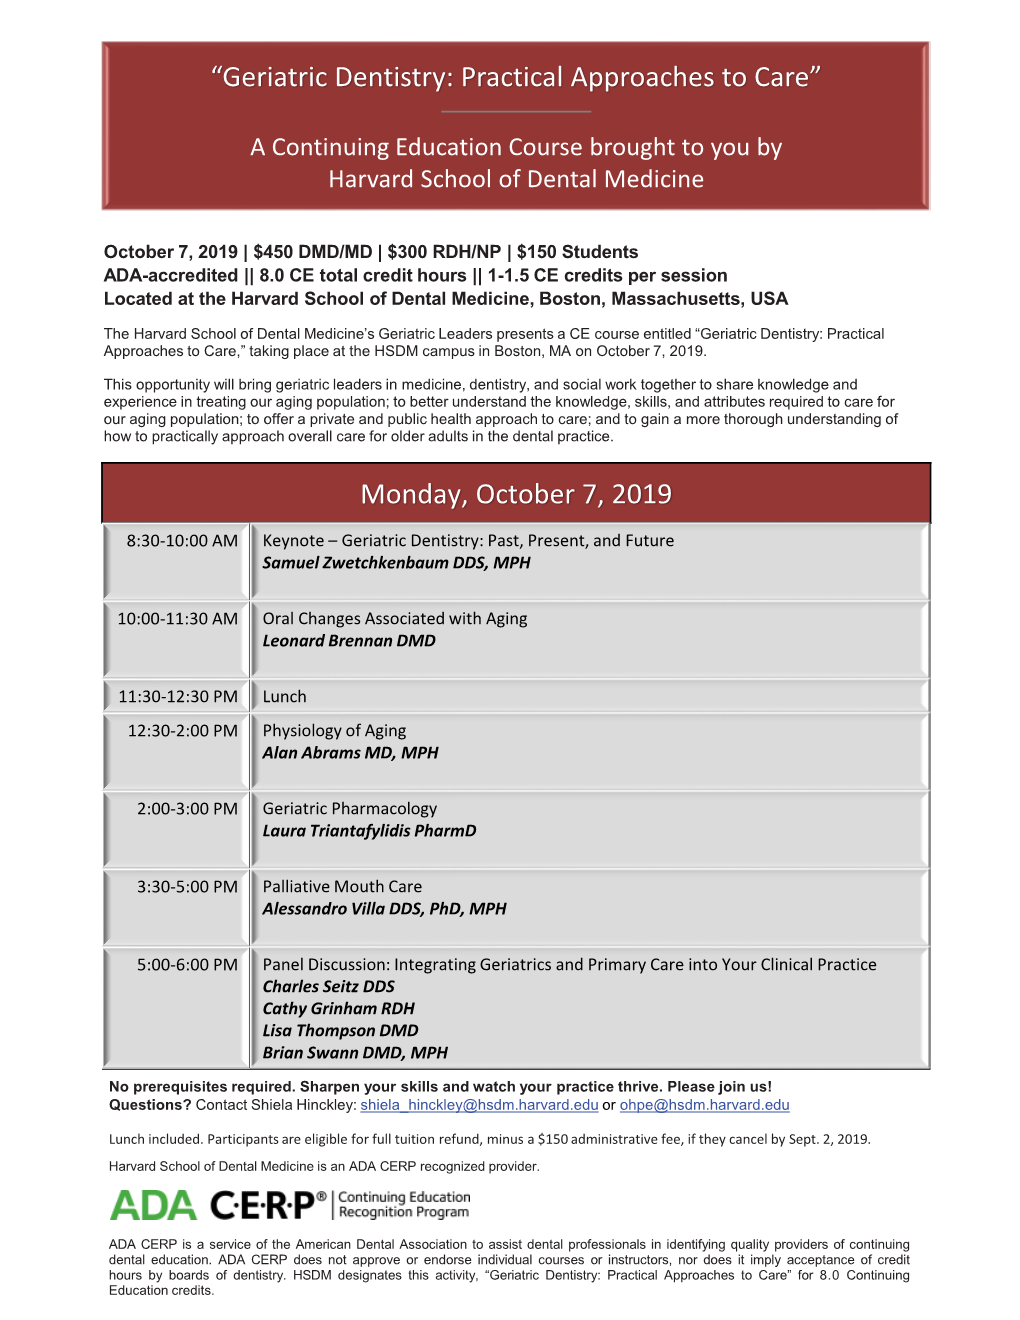 Monday, October 7, 2019 “Geriatric Dentistry: Practical Approaches To